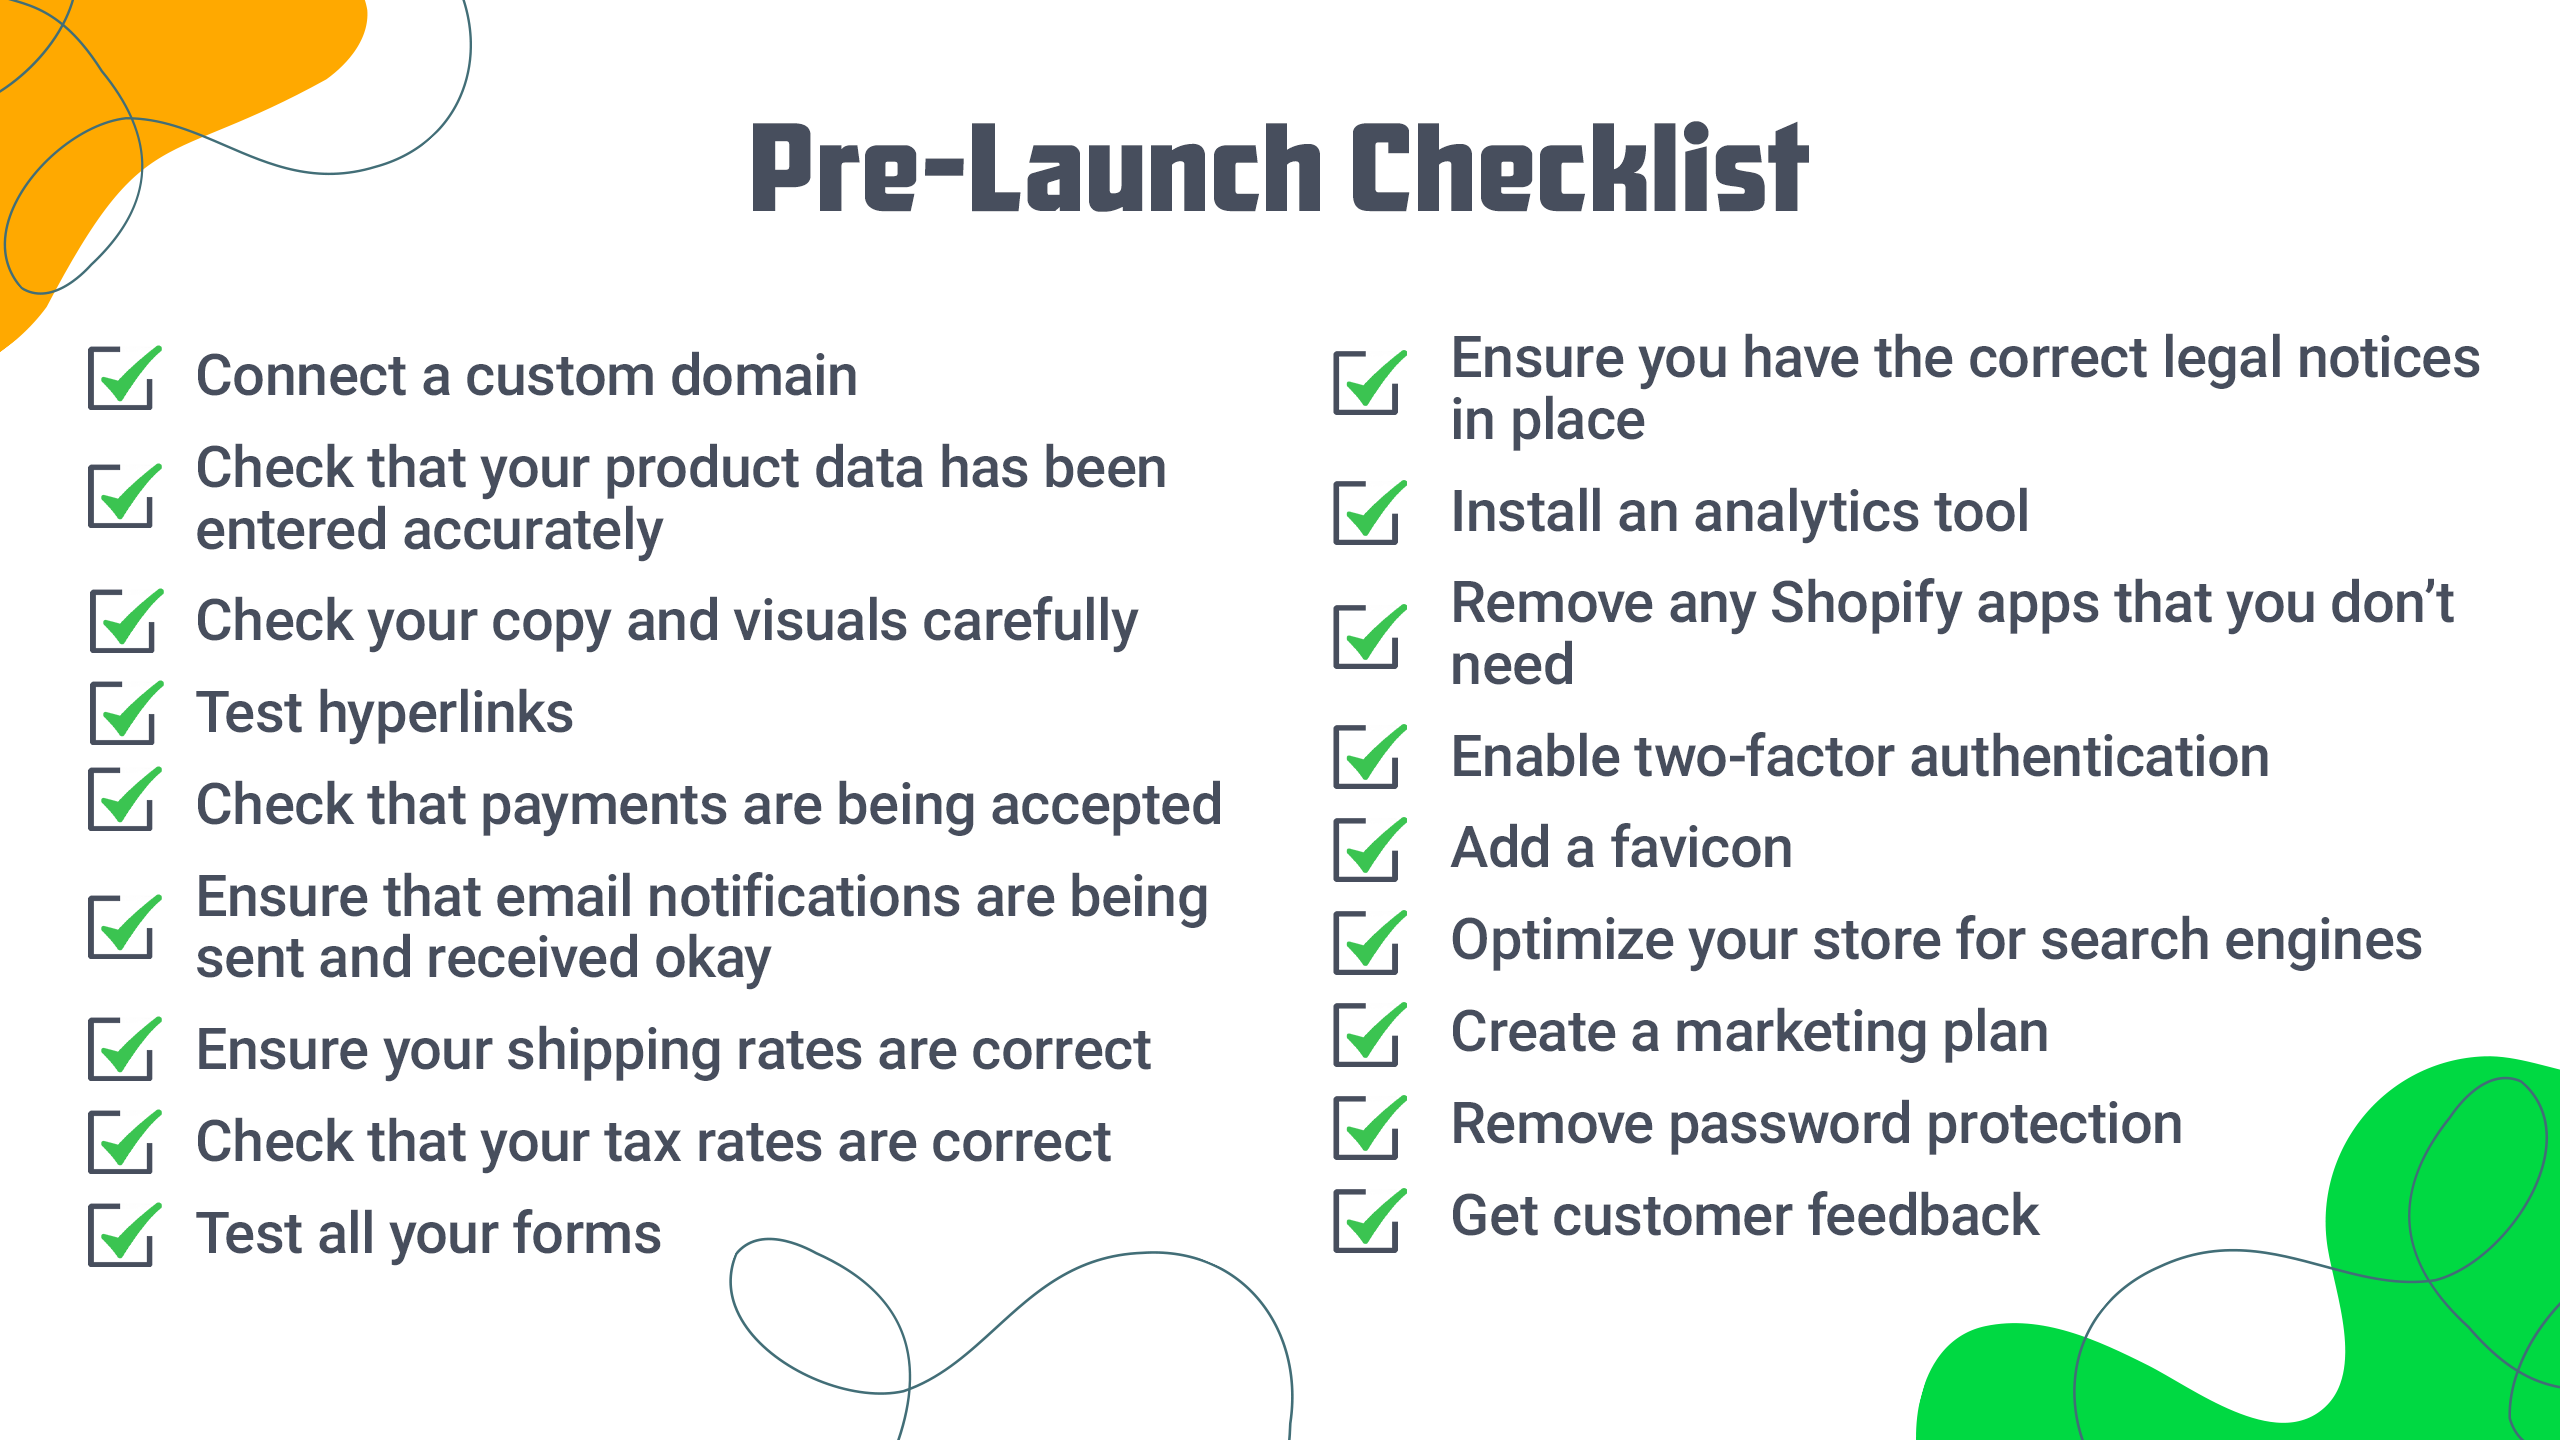 Pre-launch checklist on starting shopify print on demand business